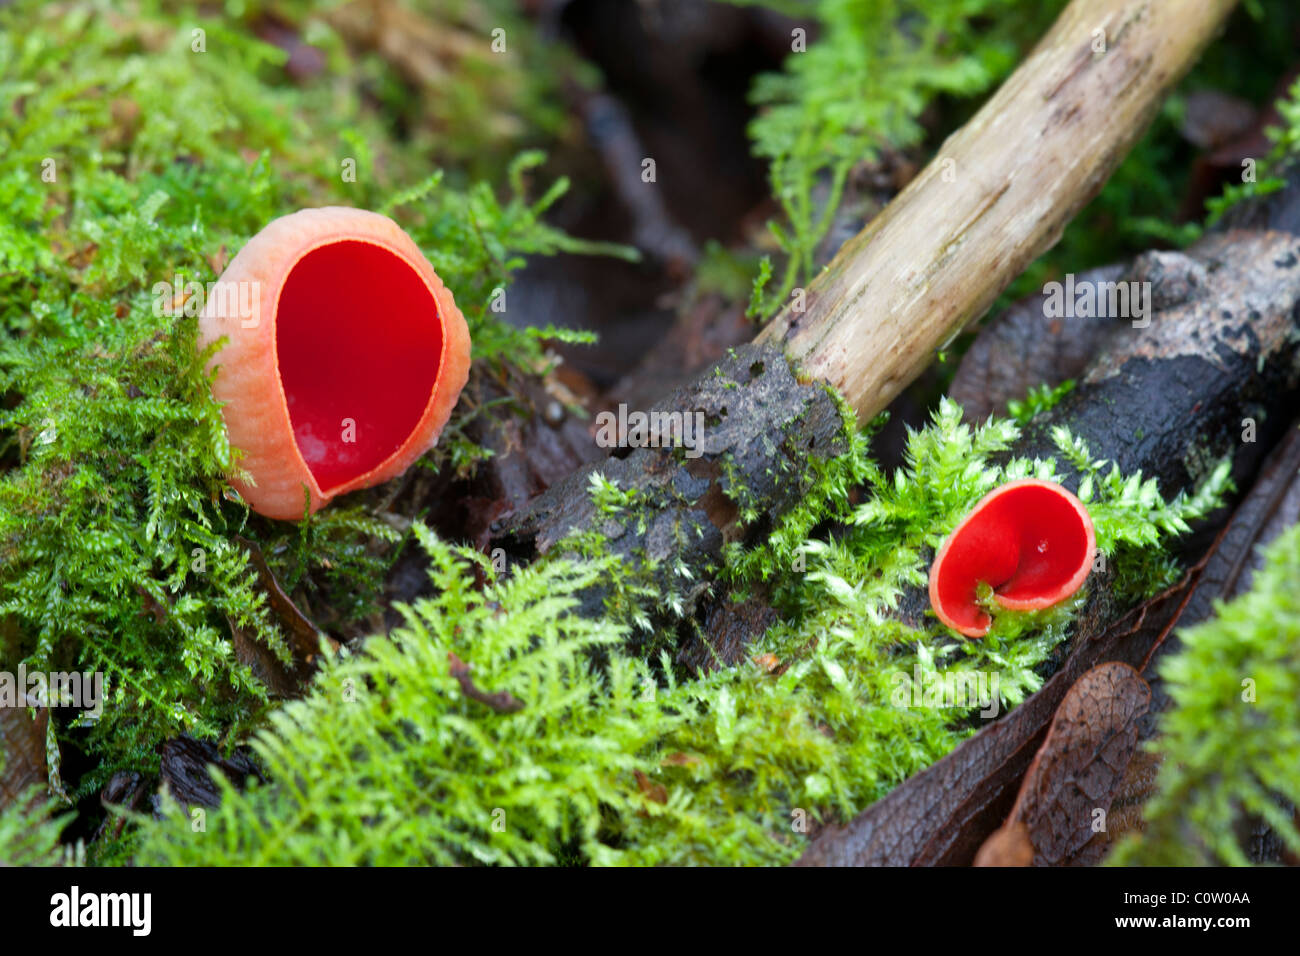 Scarlet Elf Cup Sarcoscypha coccinea fungi fruiting bodies growing in moss on dead branches Stock Photo